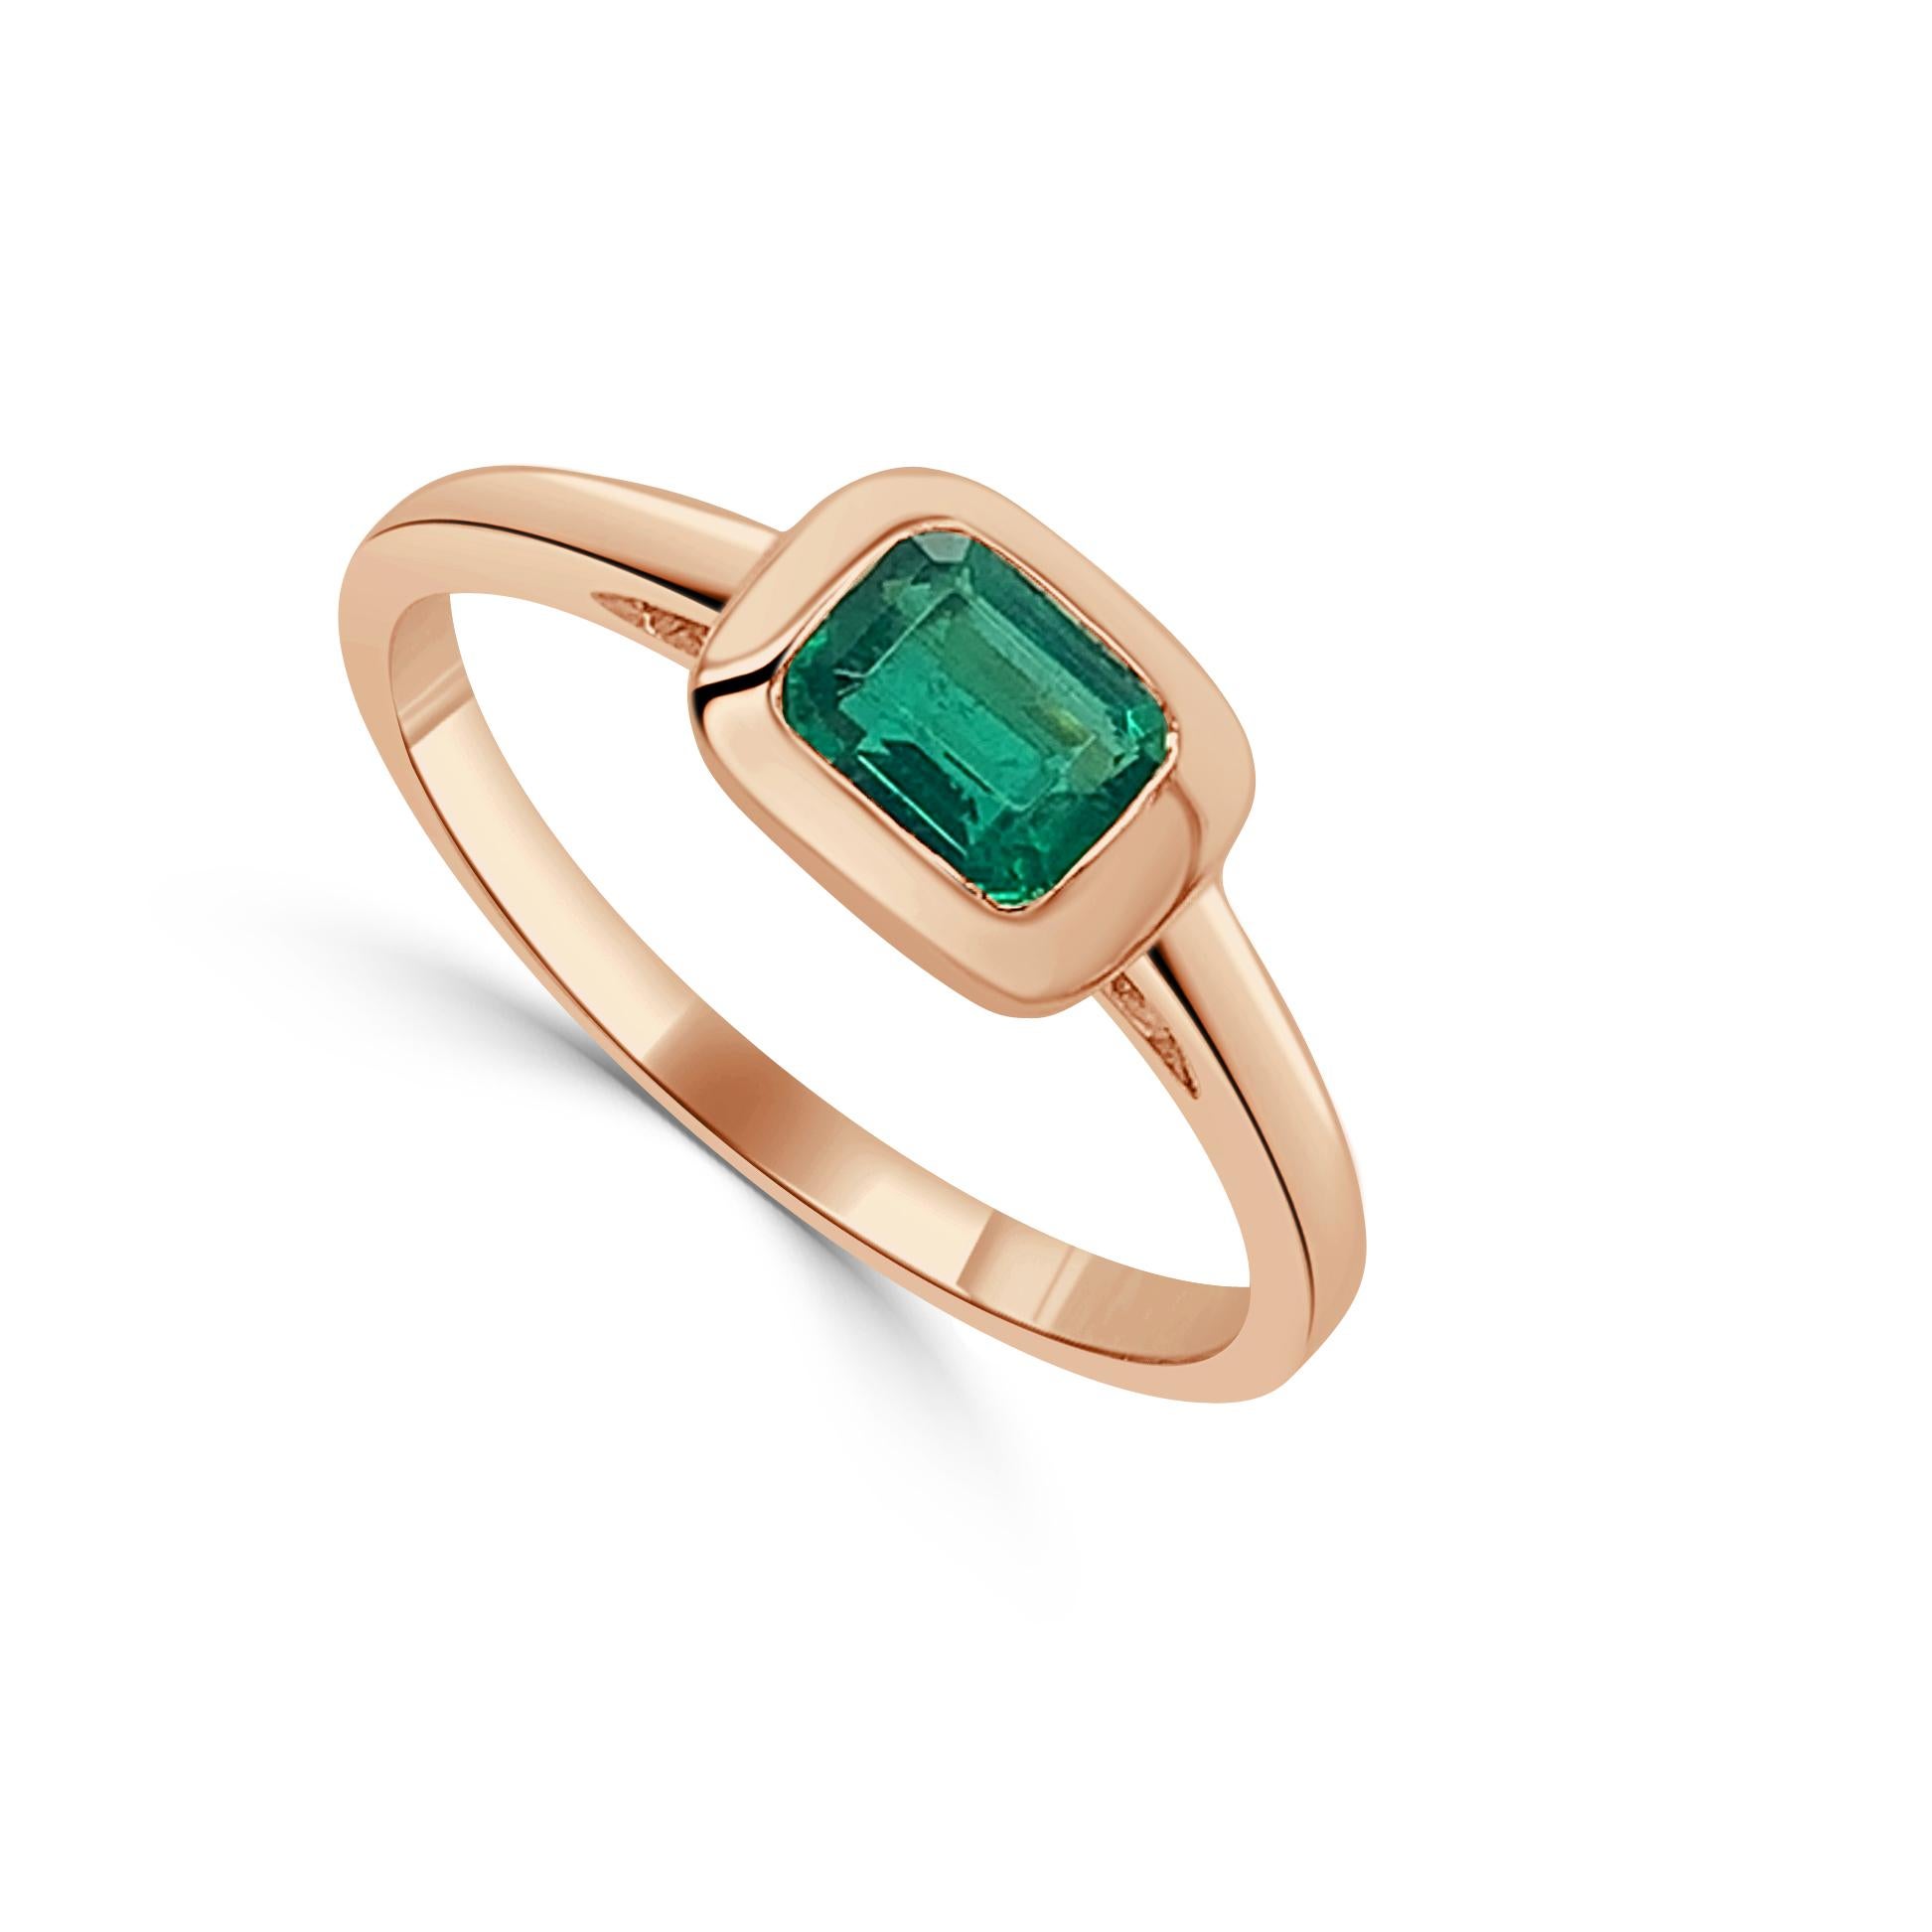 Charming and Elusive Design - This stackable ring features a 14k gold band, and a emerald cut shaped gorgeous Emerald approximately 0.60cts, available in white, yellow and rose gold.

Measurements for ring size: The finger Size of the ring is 7 and